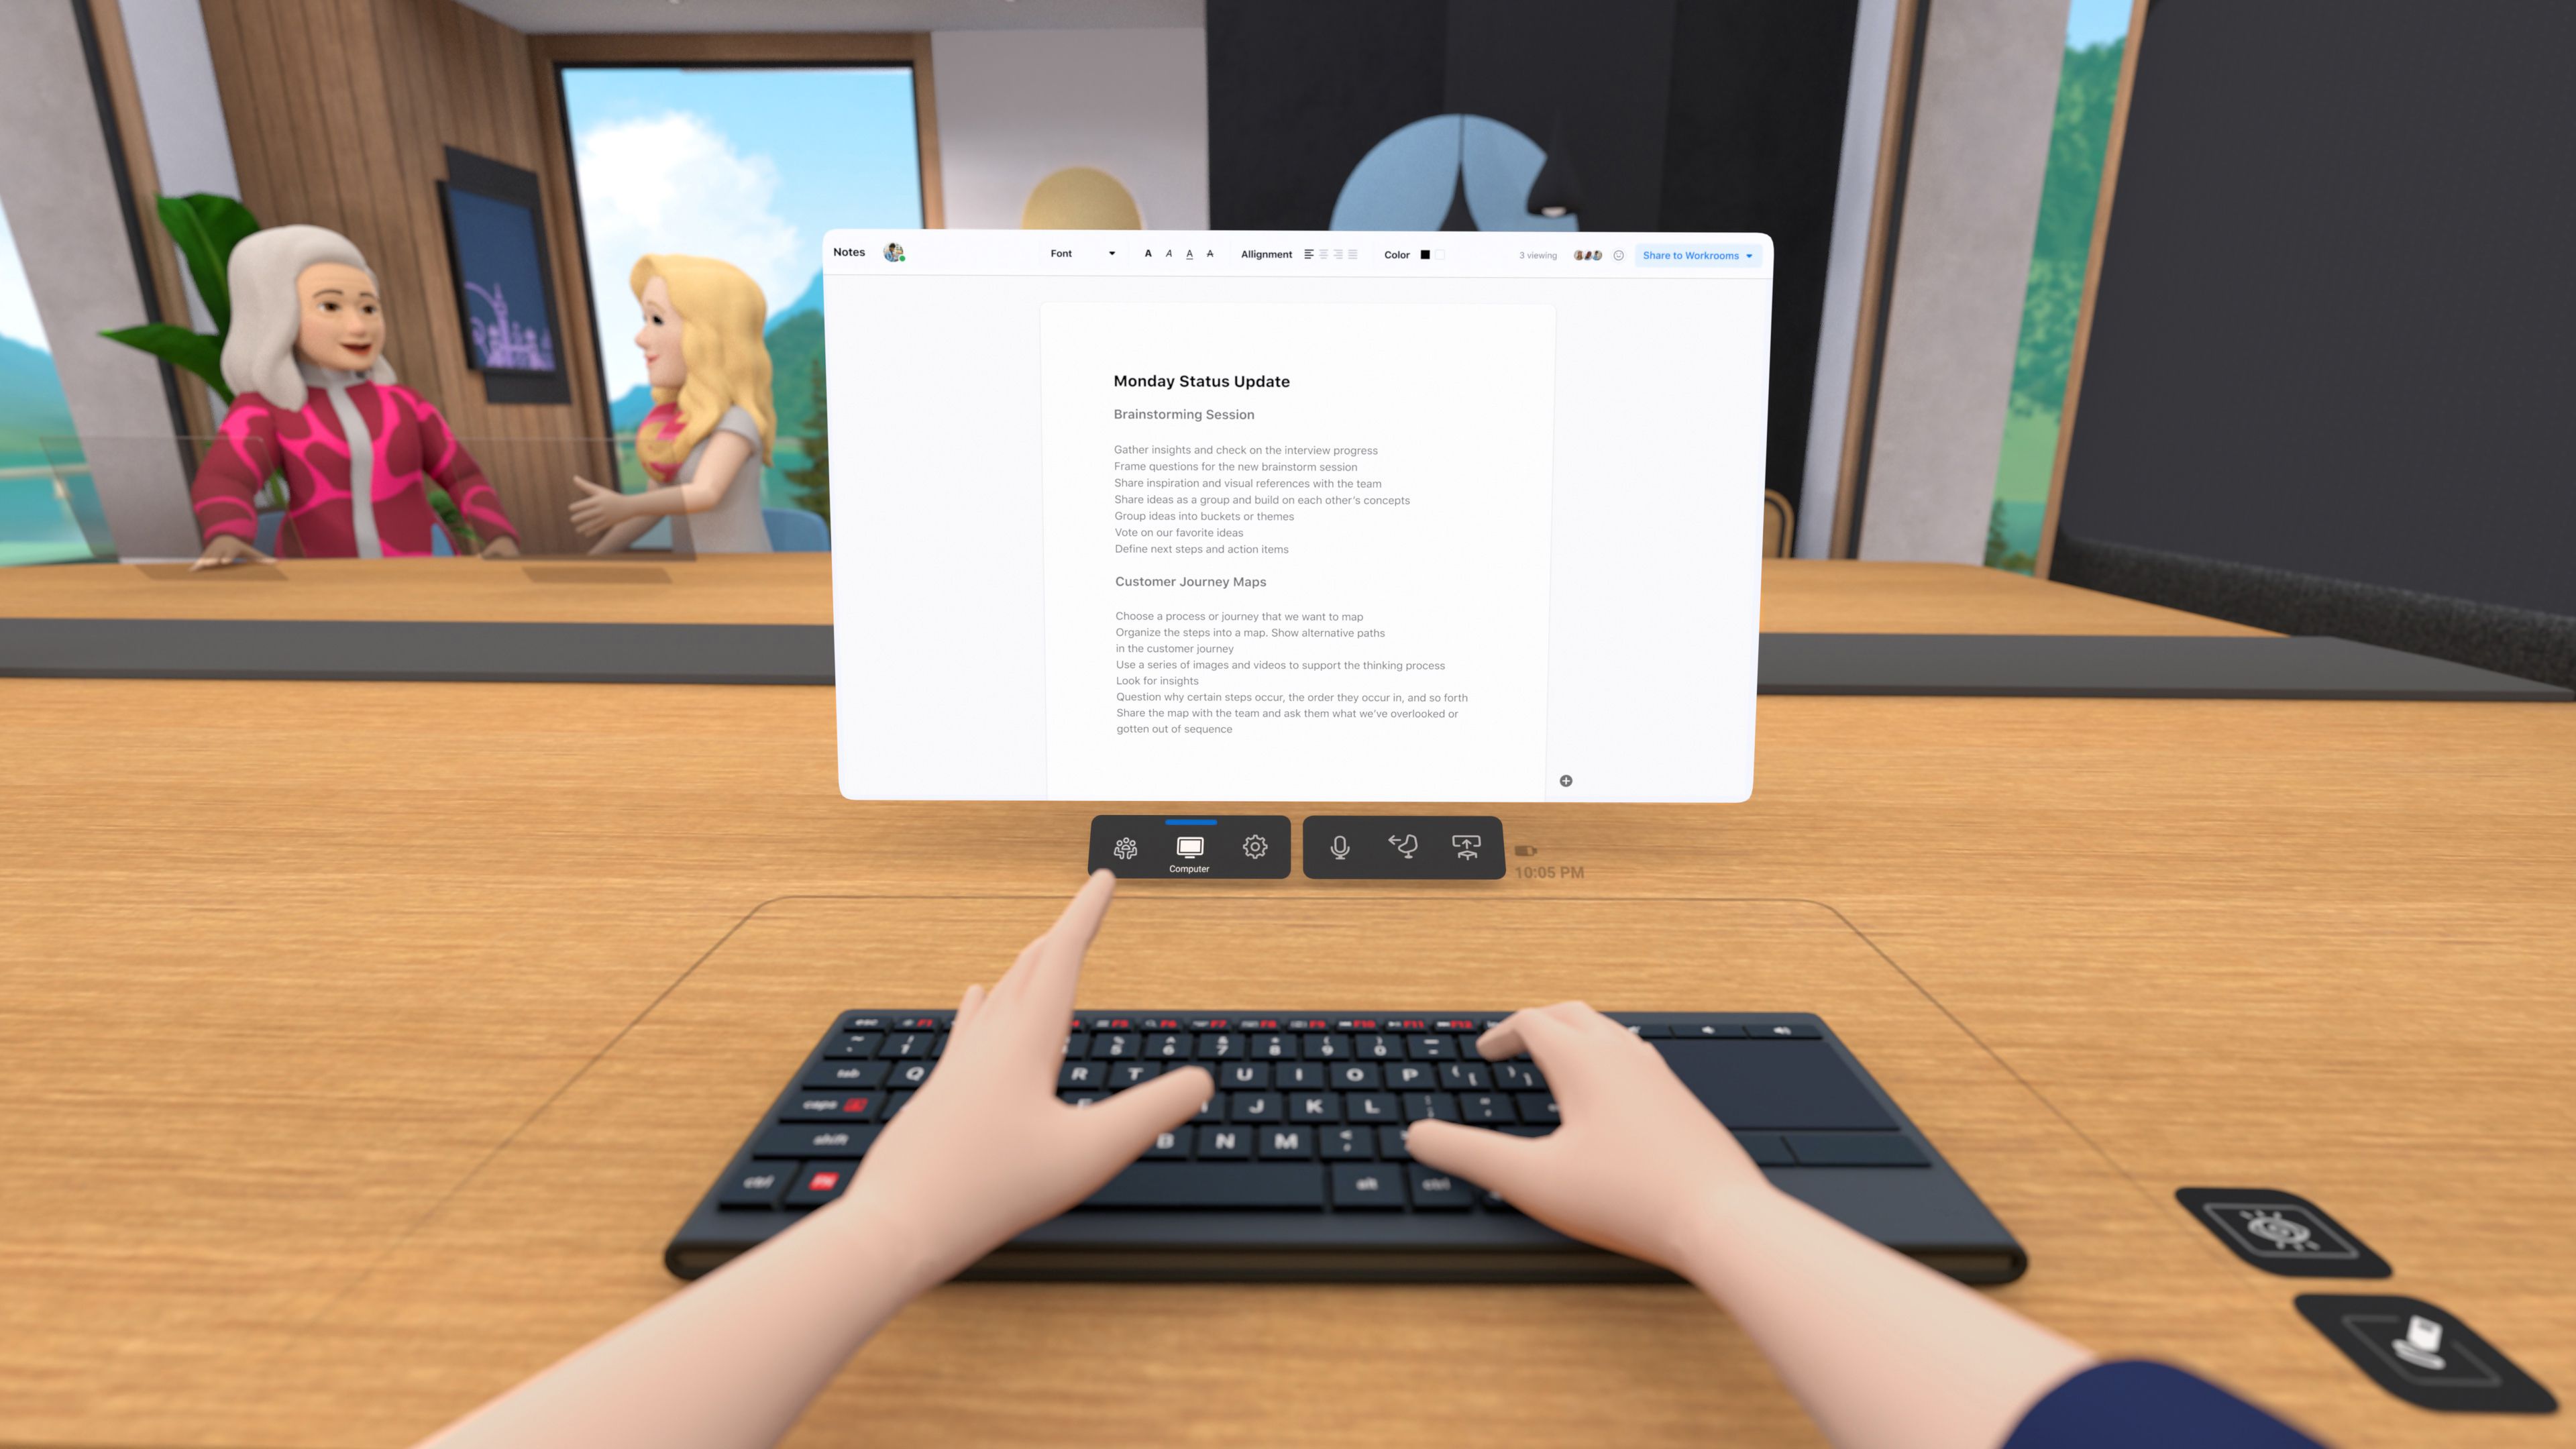 Workrooms participants can bring a virtual version of their computer screen and keyboard into a meeting, allowing for note taking and Web browsing.